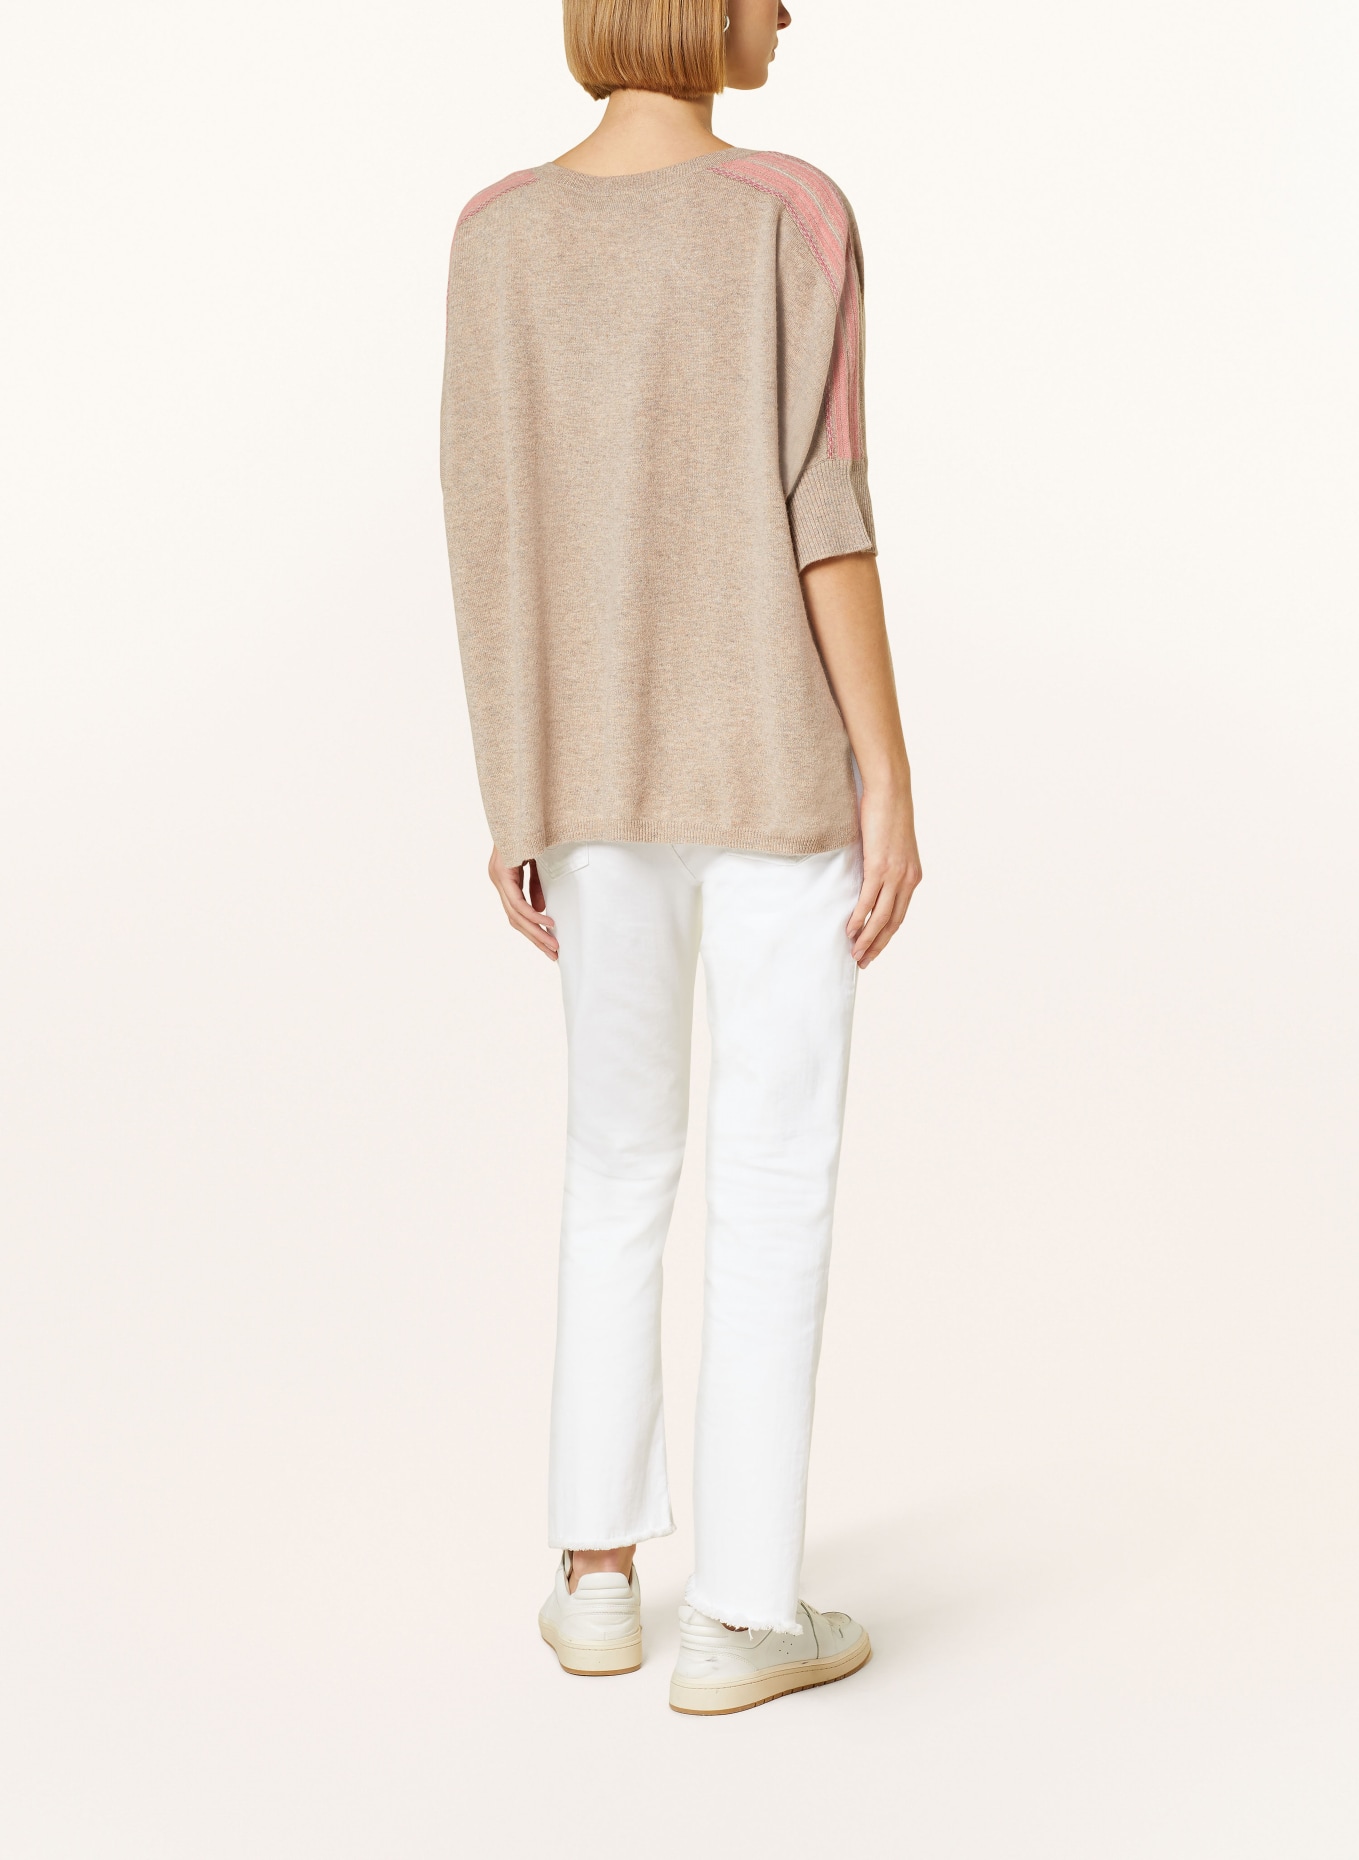 REPEAT Knit shirt in cashmere, Color: BEIGE (Image 3)